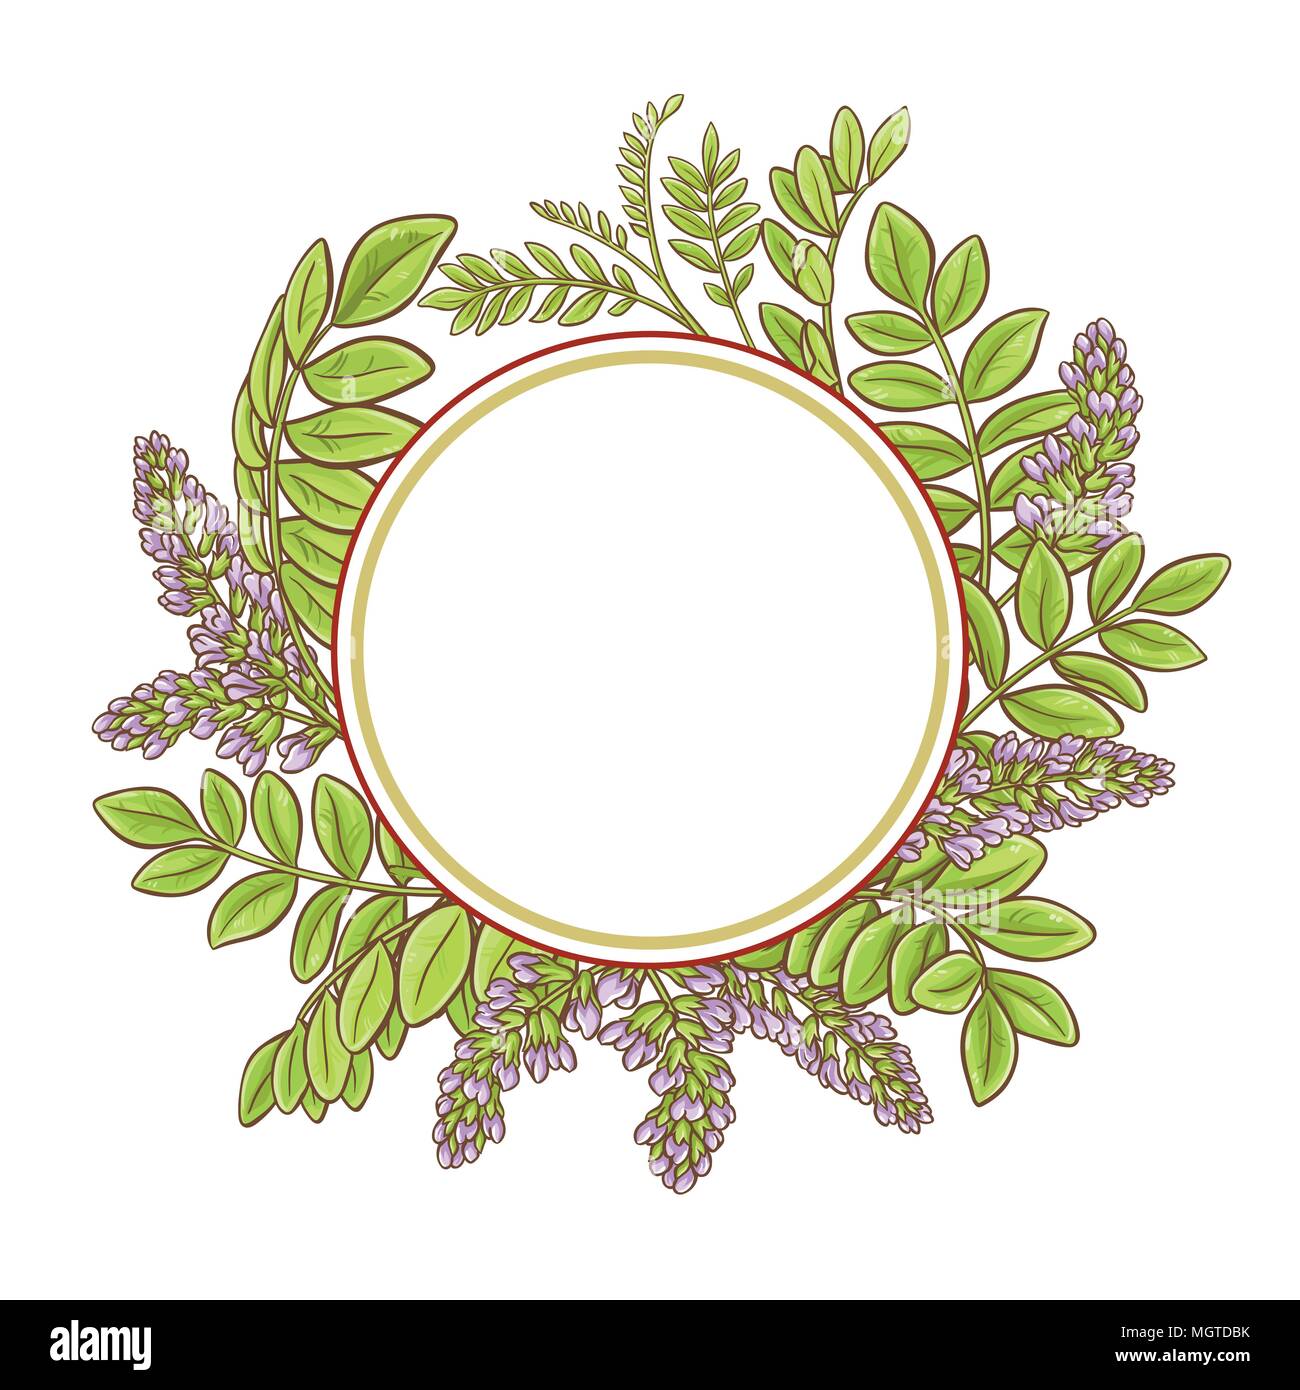 licorice plants vector frame on white background Stock Vector